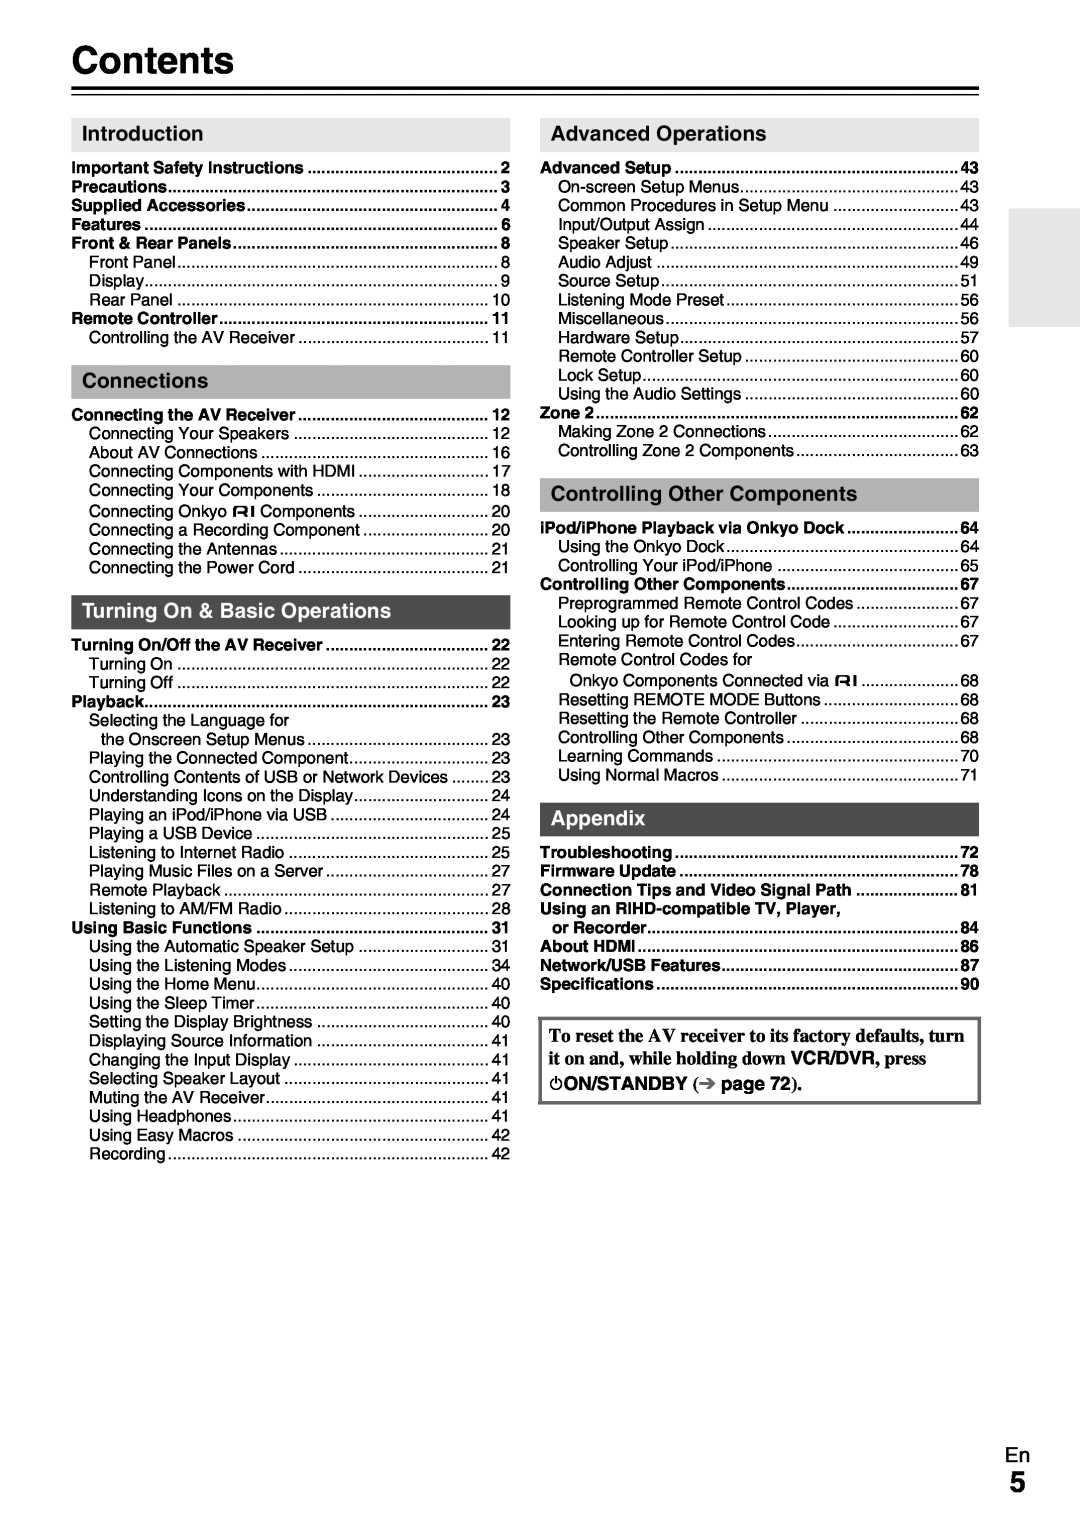 Onkyo HT-RC370 instruction manual Contents, Turning On & Basic Operations, Appendix, 8ON/STANDBY page 